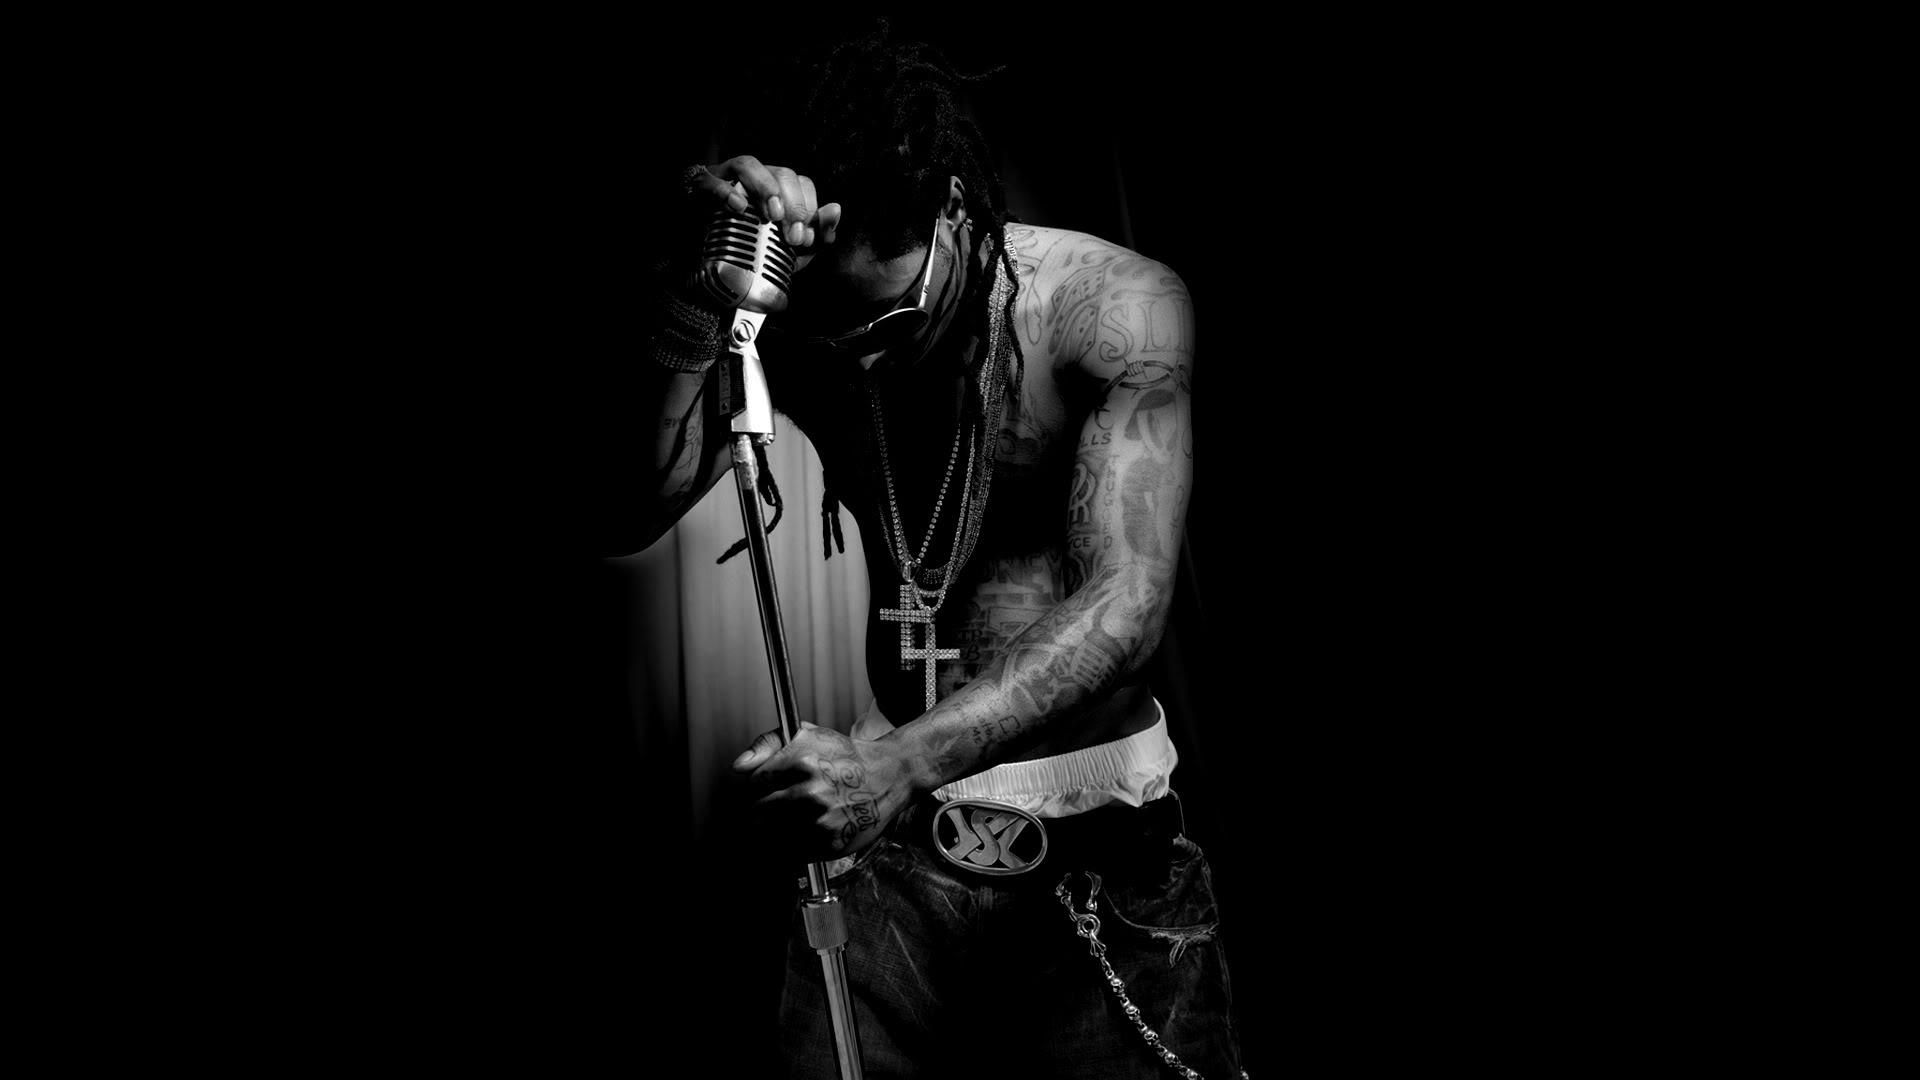 1451665 Lil Wayne Wallpaper Hd Free Wallpapers Backgrounds Images